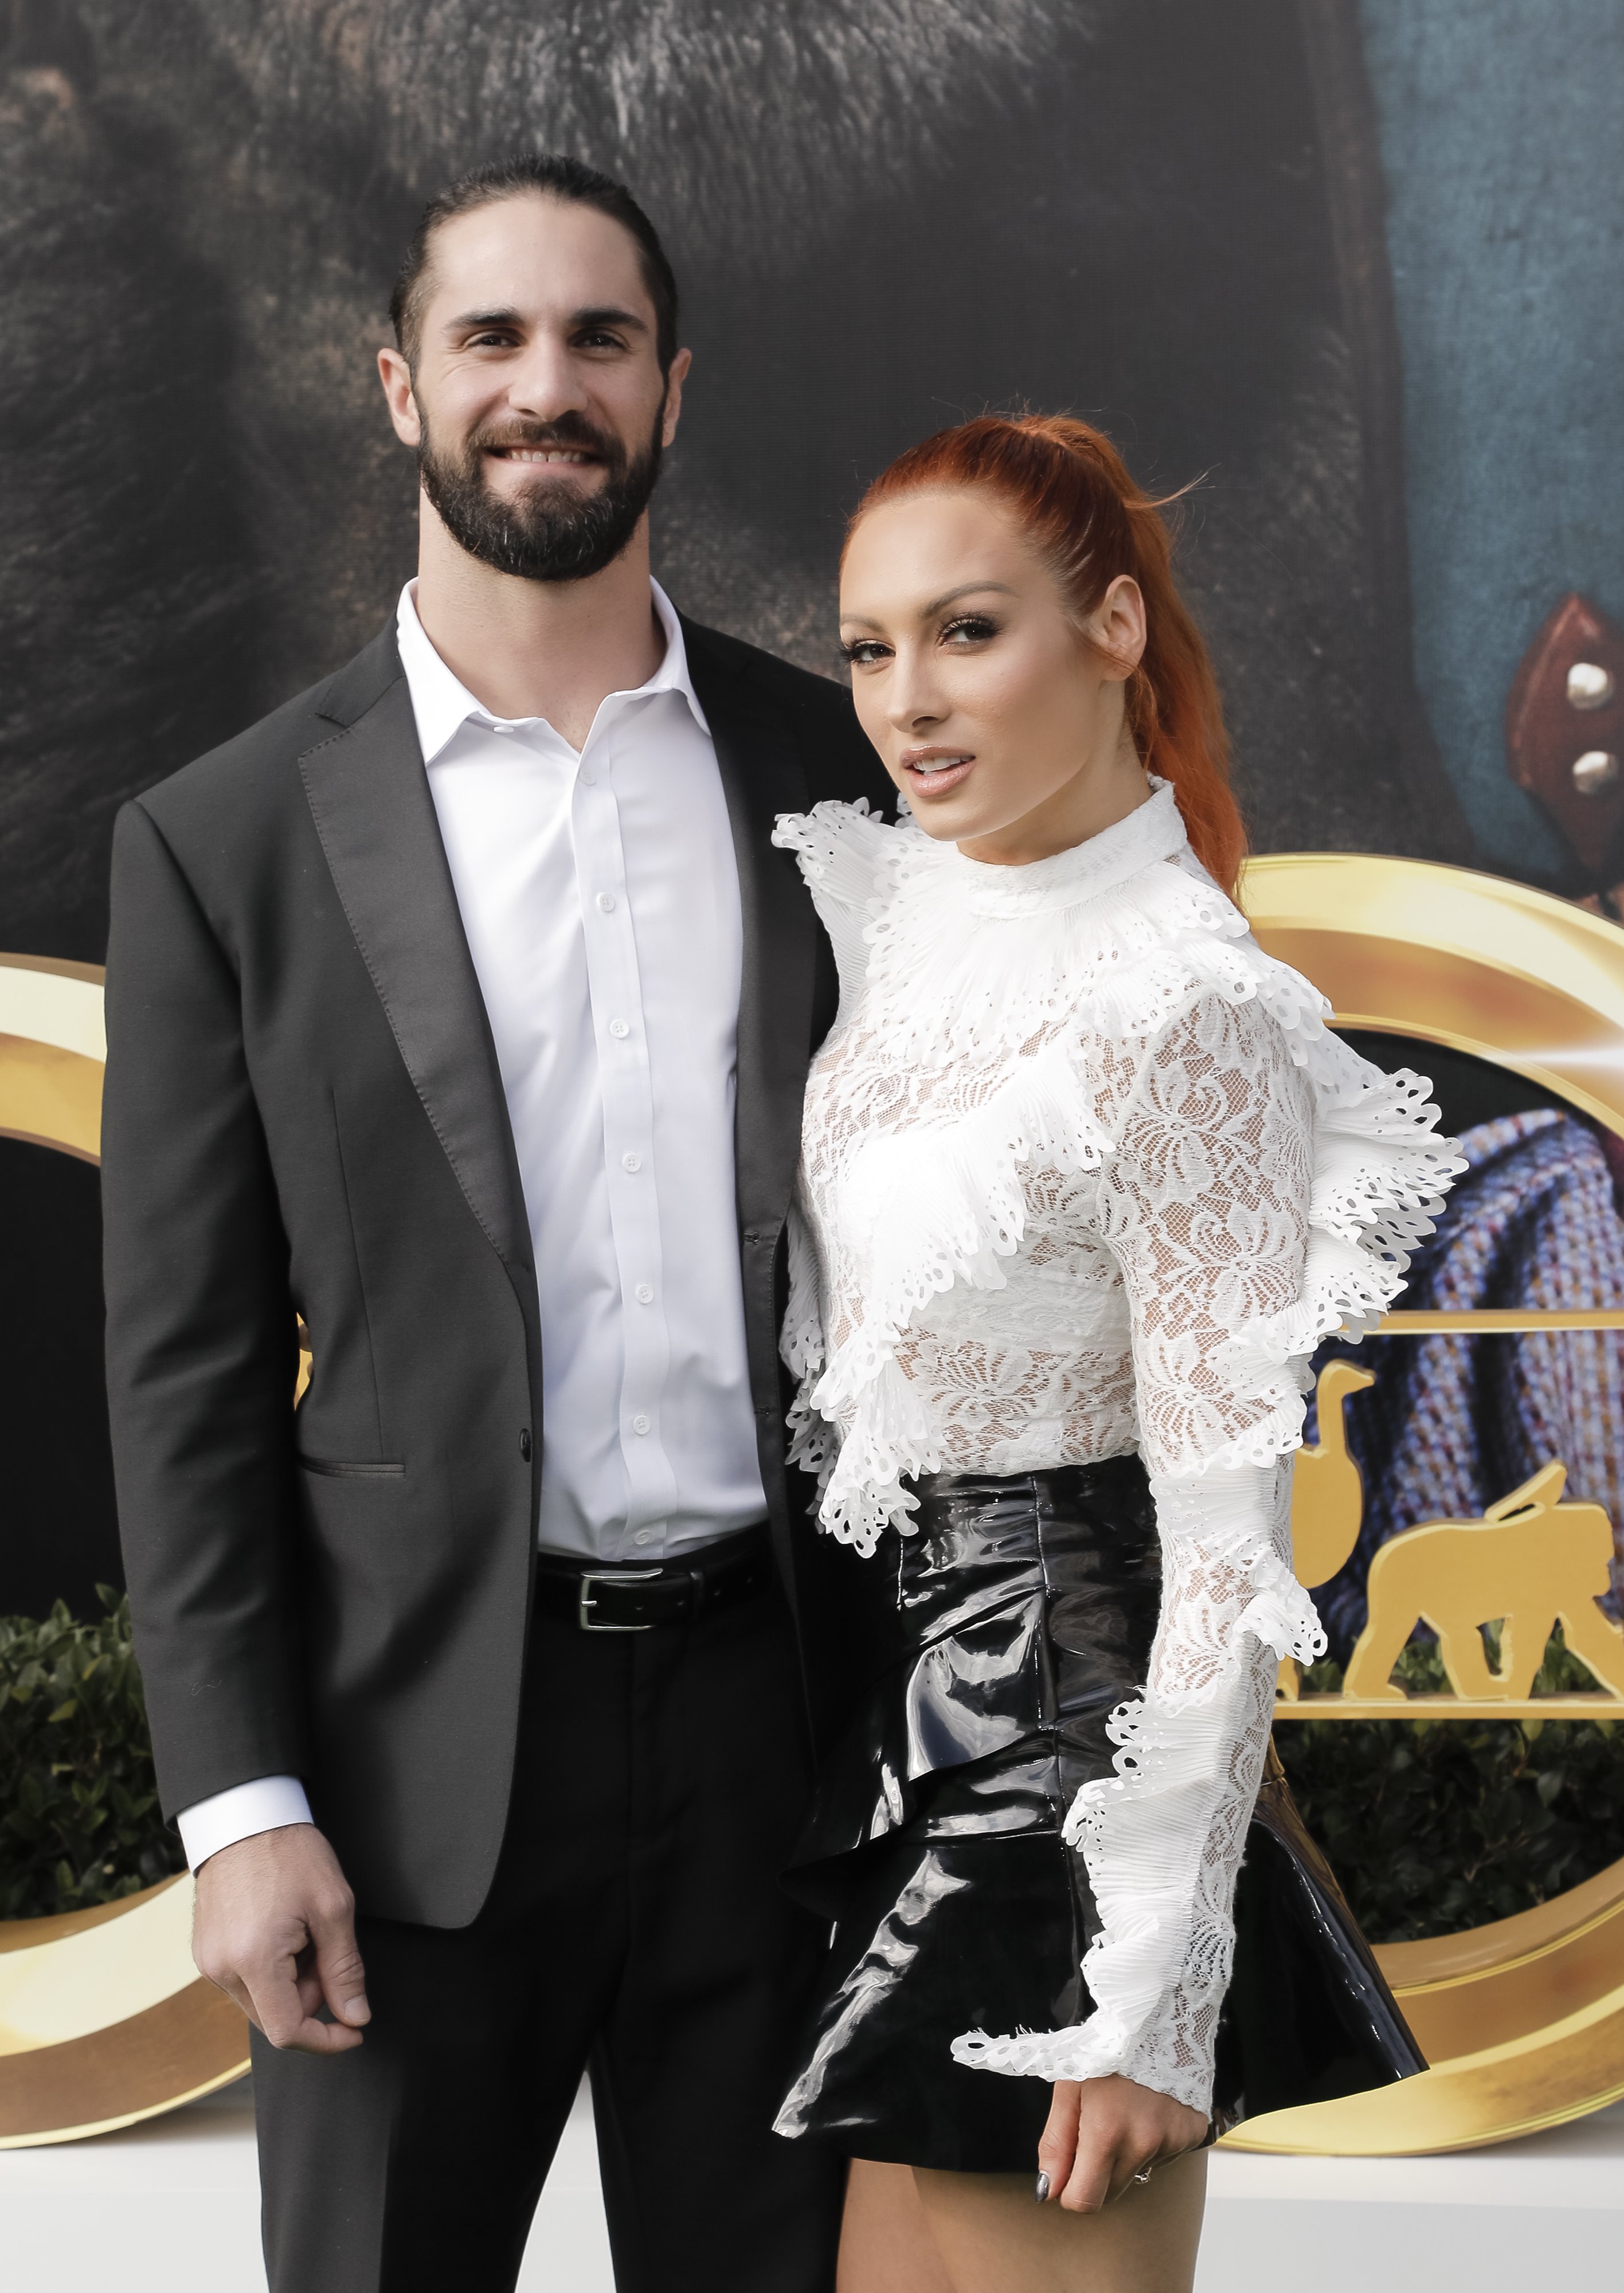 Seth Rollins and Becky Lynch at the "Dolittle" premiere hosted at Regency Village Theatre in Westwood, California on January 11, 2020. | Source: Getty Images